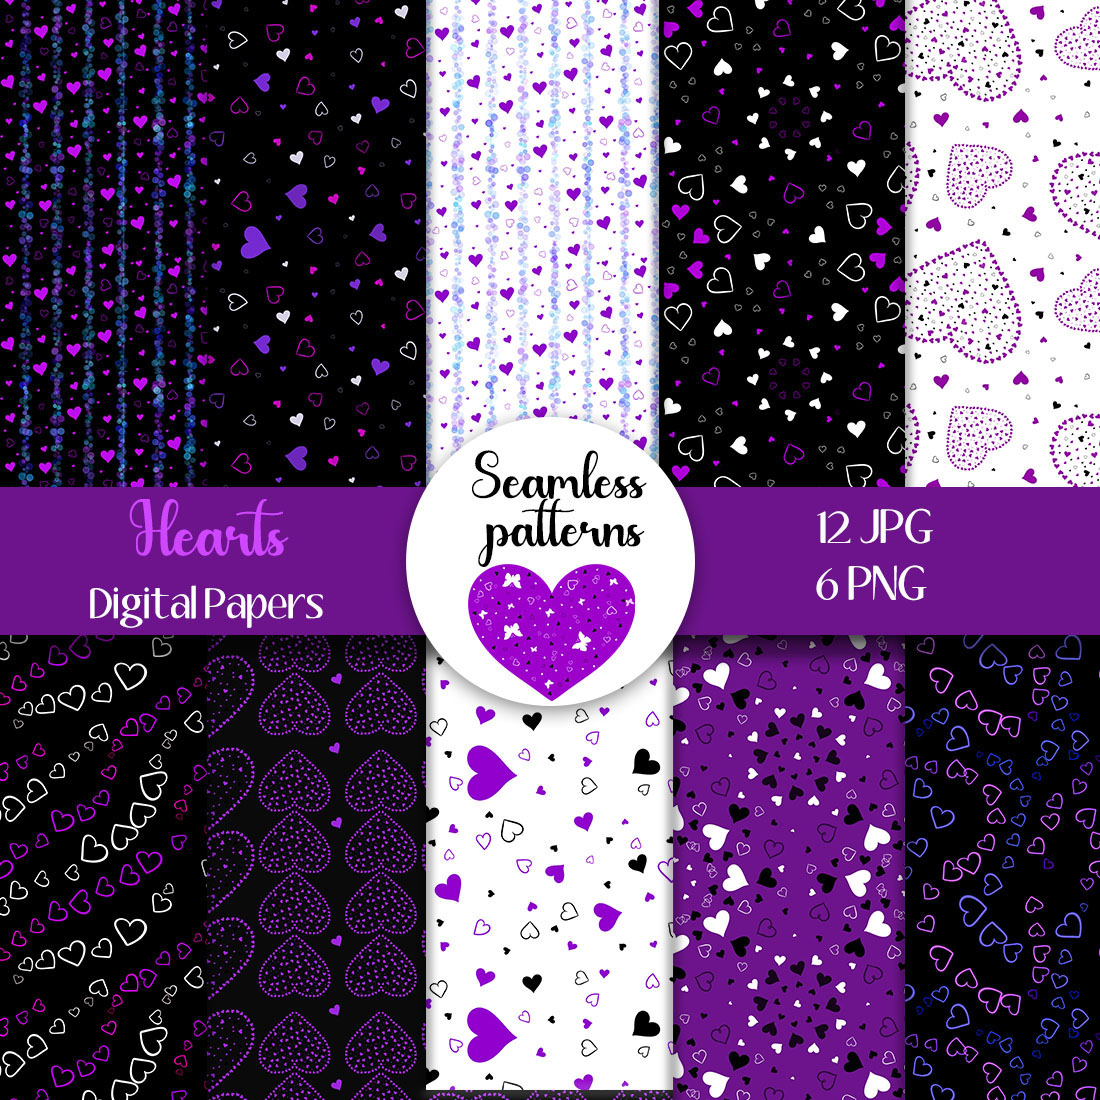 Seamless Template with Purples Hearts.